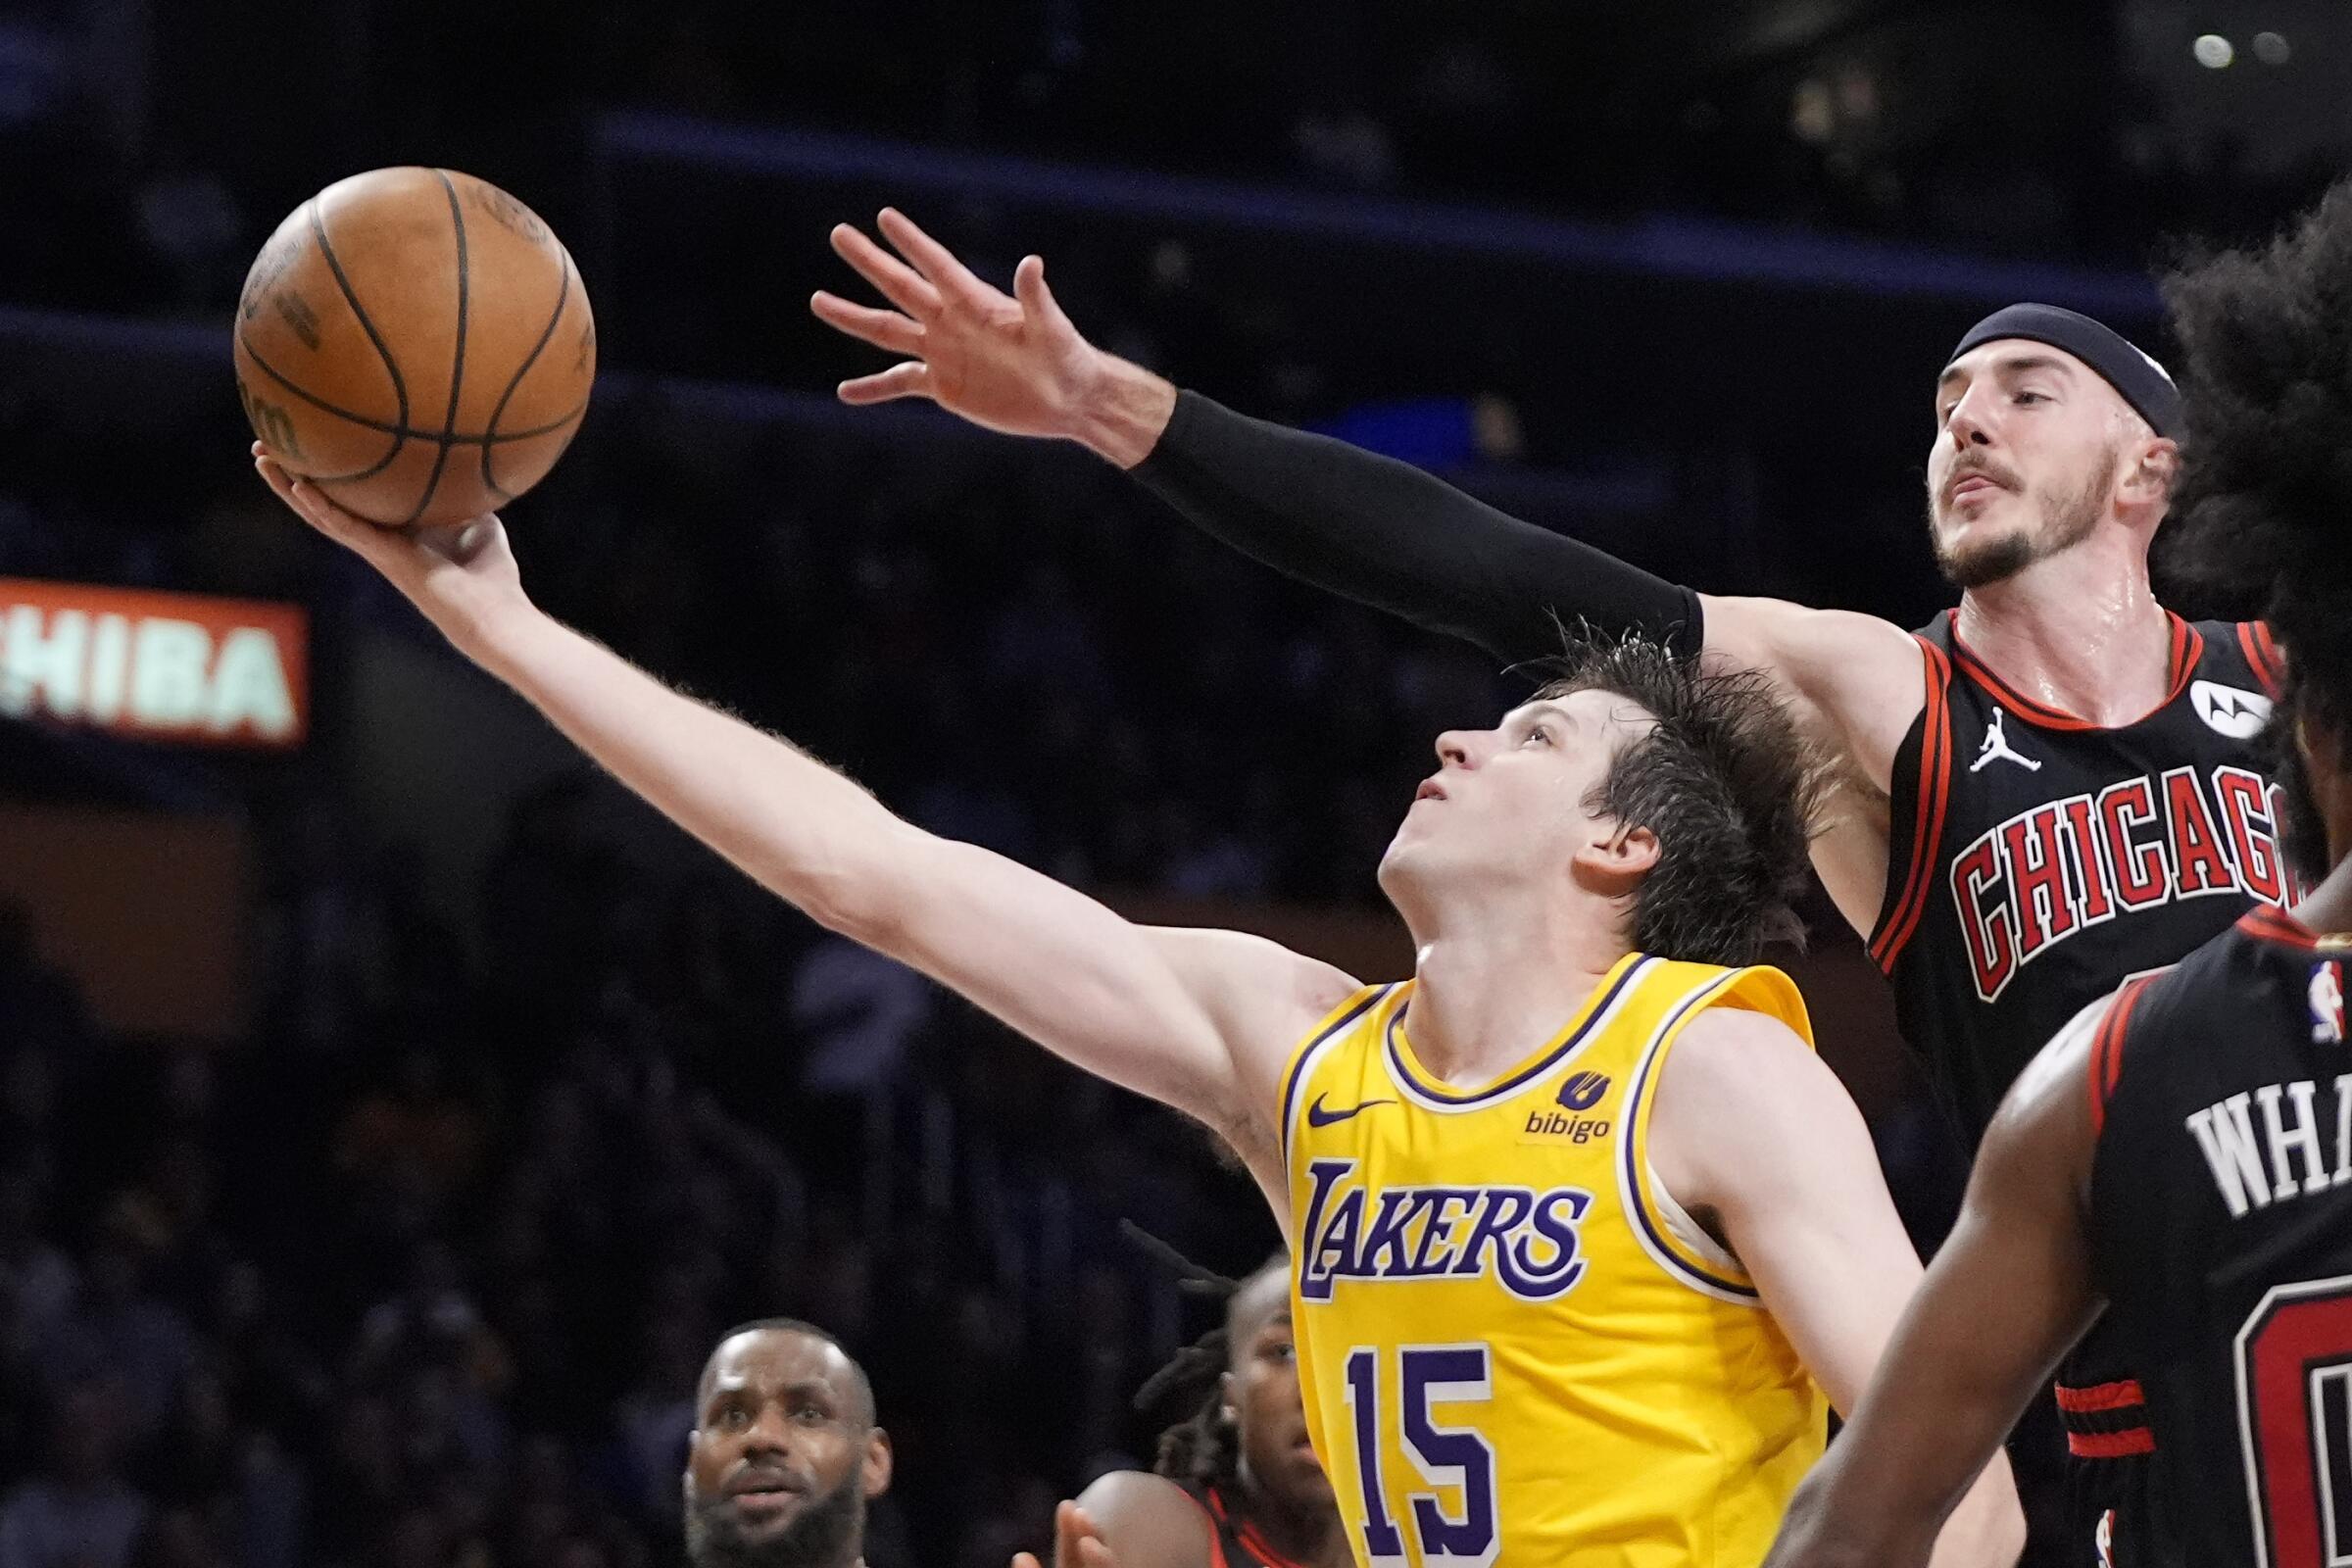 Lakers guard Austin Reaves drives past Bulls guard Alex Caruso defends during Thursday's game.